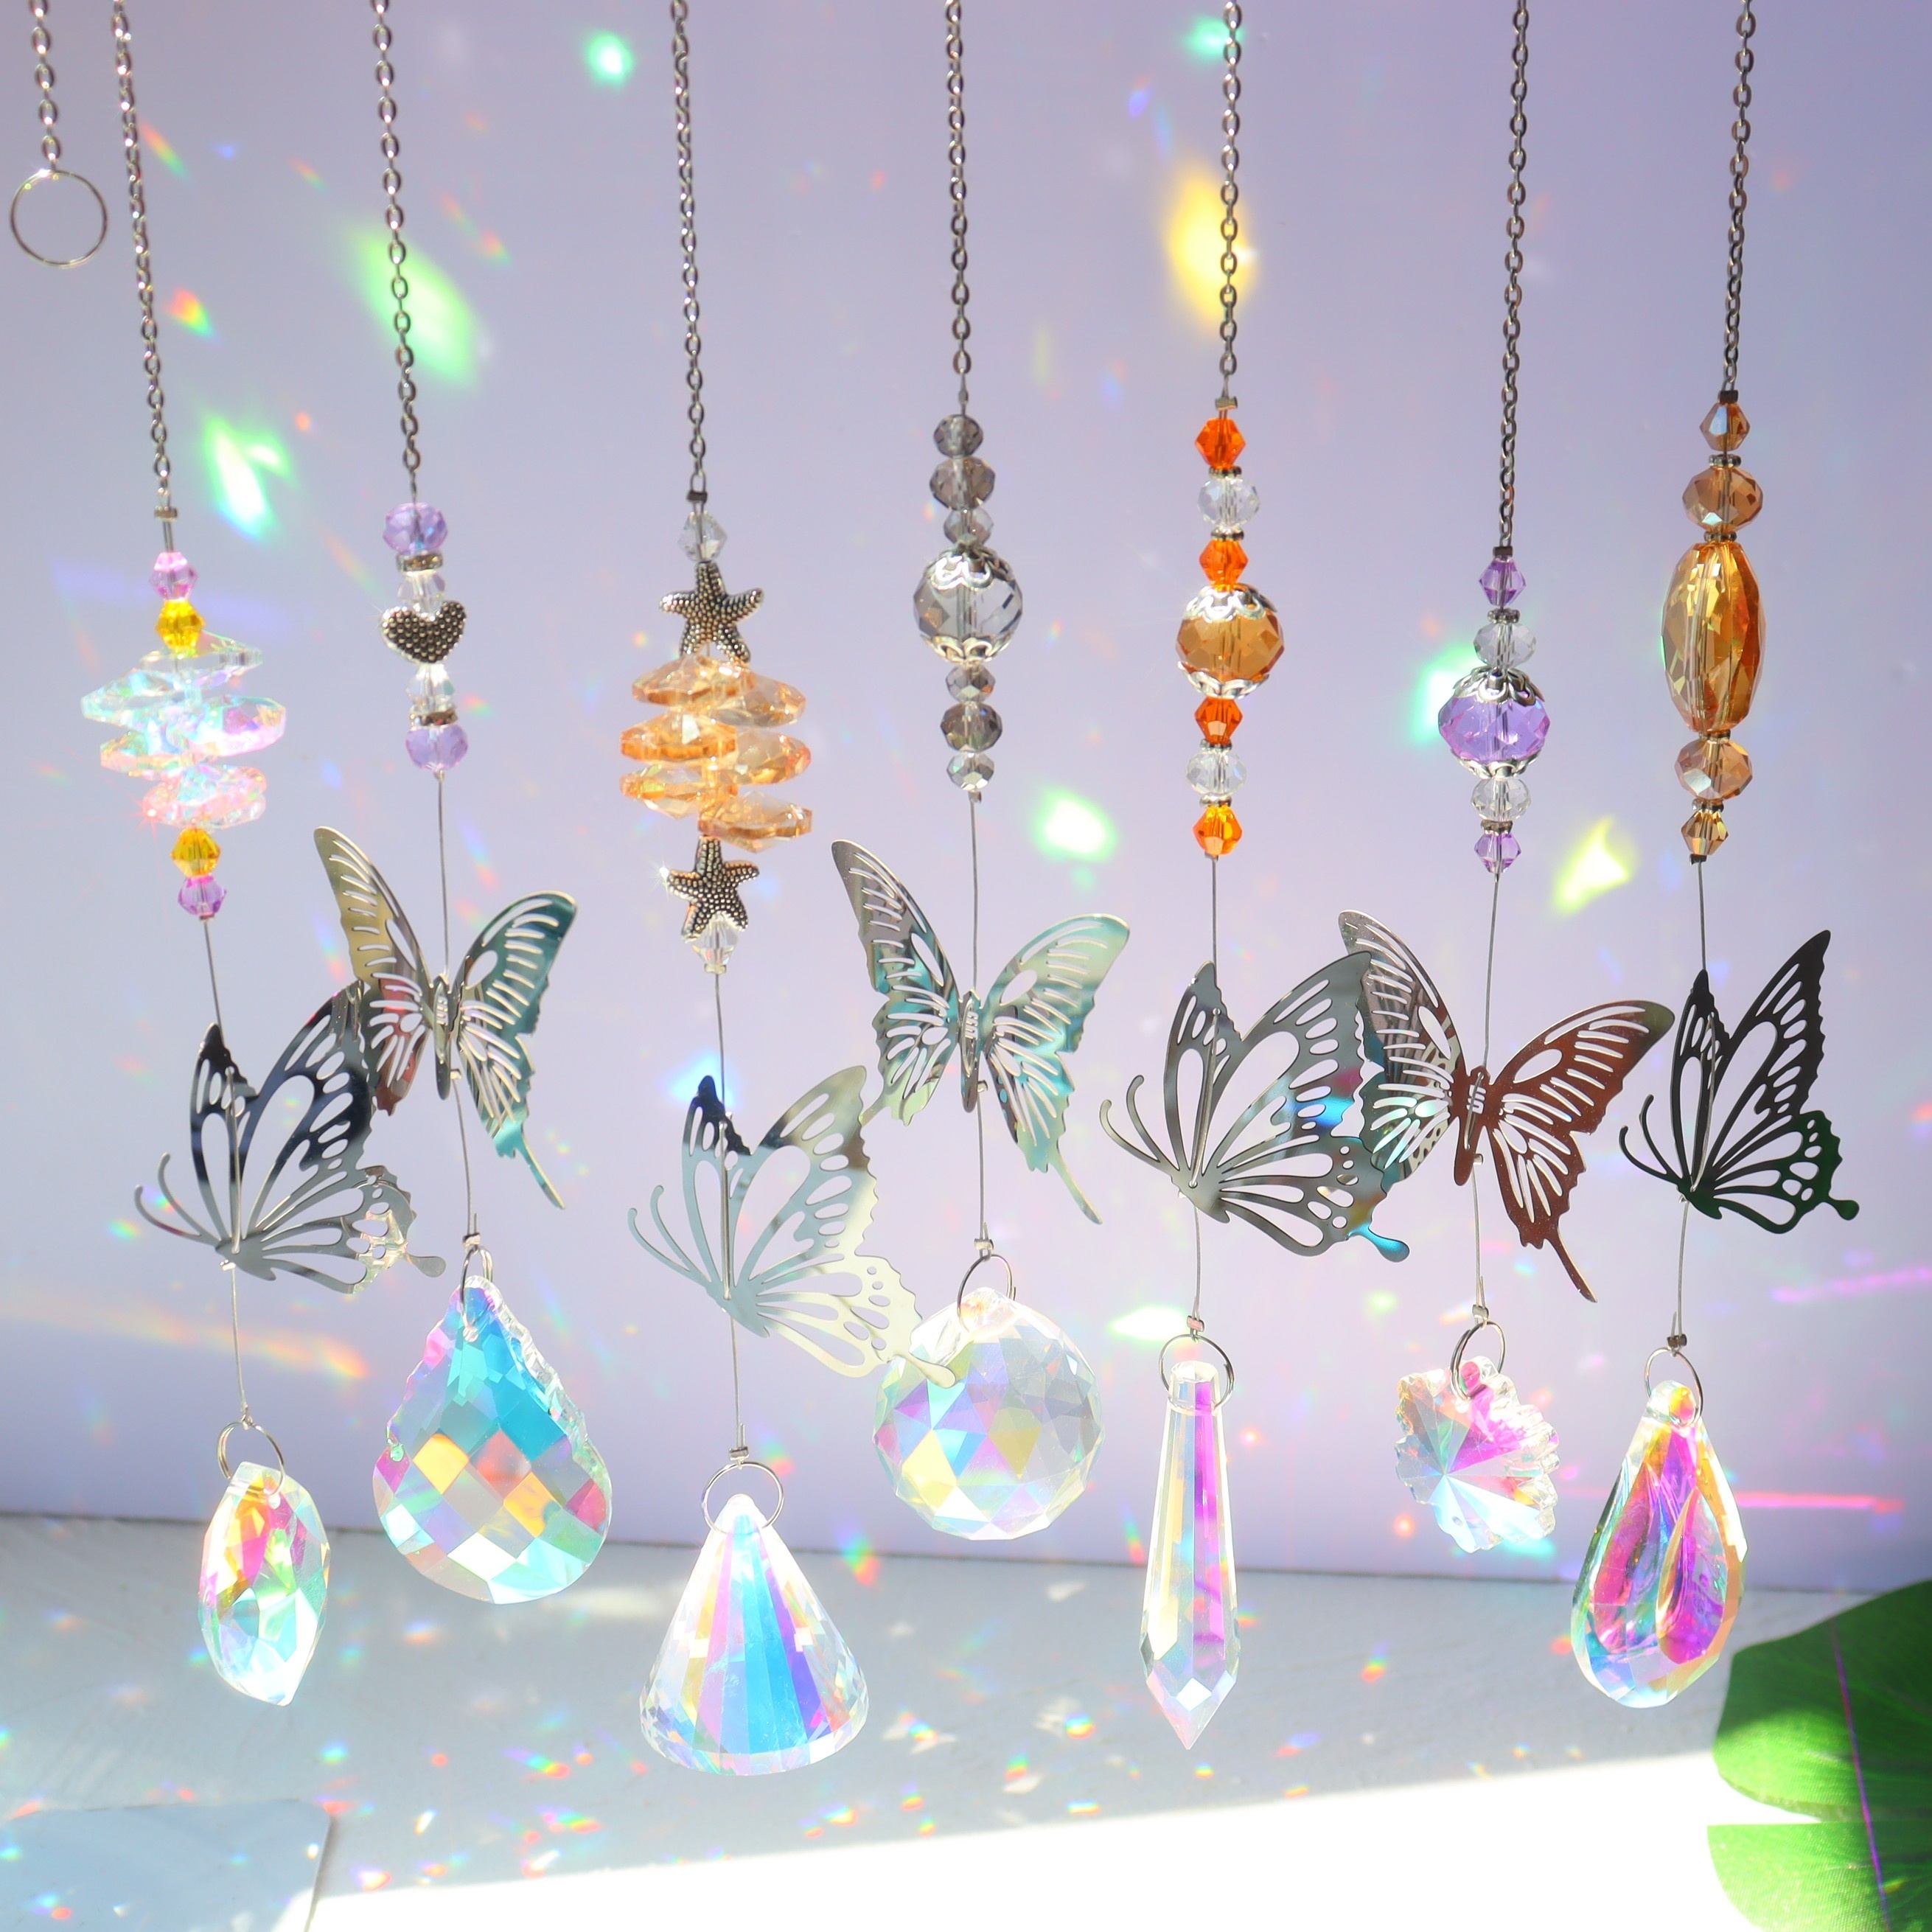 8 Pieces Colorful Crystals Suncatcher Silver Hanging Sun Catcher Chain  Crystal Chandelier Pendant Ornament for Window Garden Christmas Day Decor